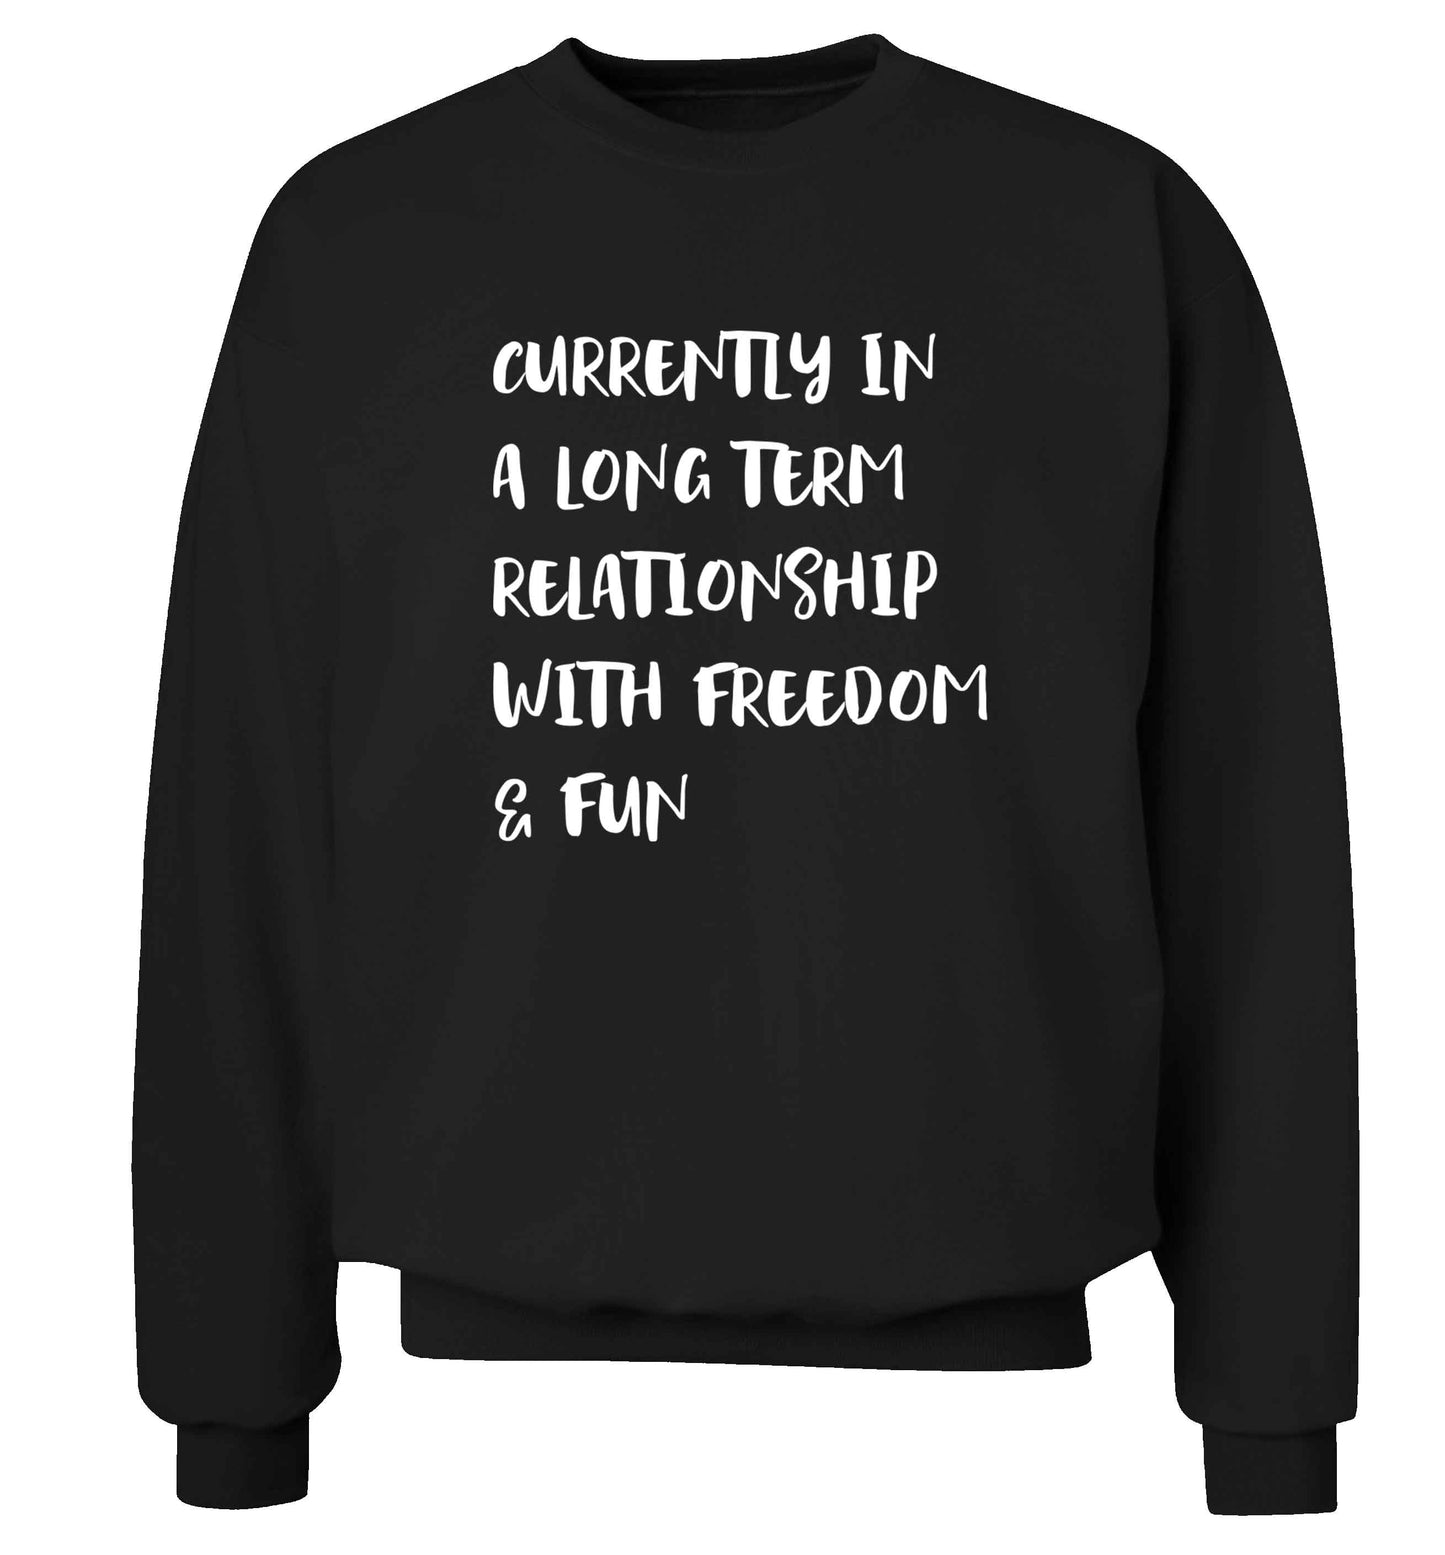 Currently in a long term relationship with freedom and fun adult's unisex black sweater 2XL